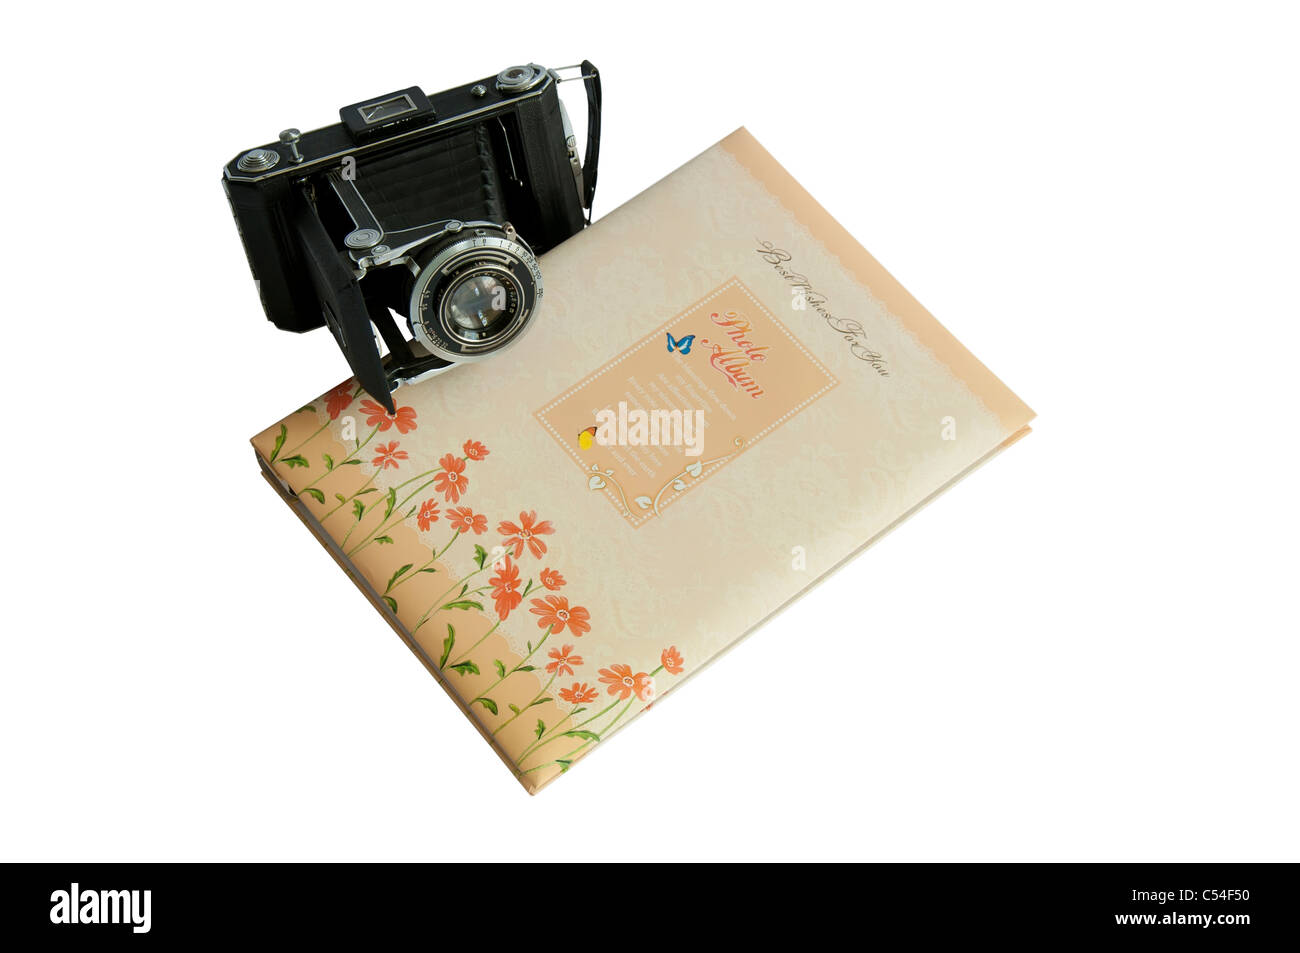 Album photo et vintage camera isolated on white Banque D'Images